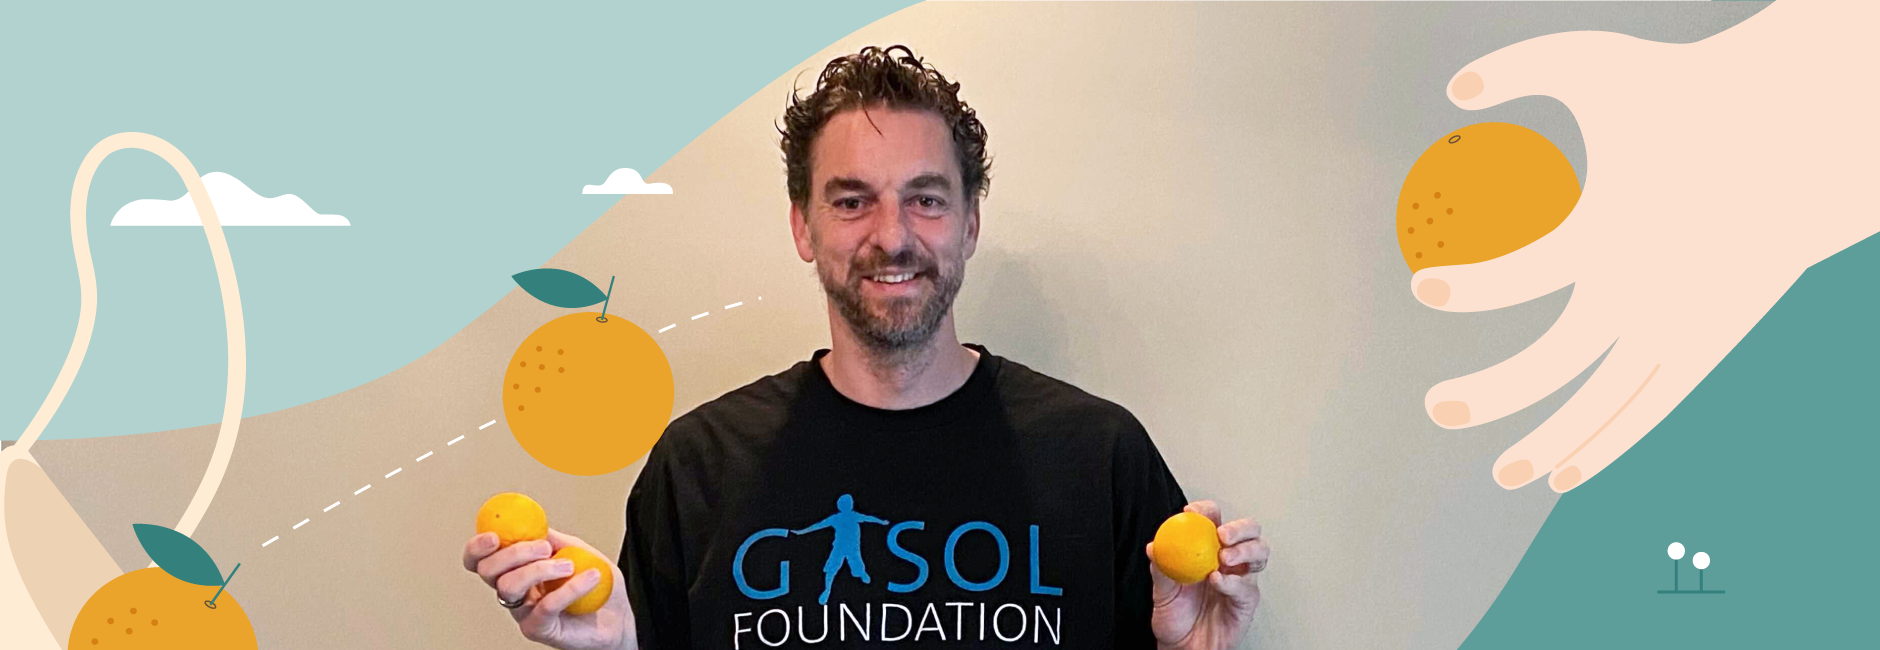 Pau Gasol with oranges in his hands